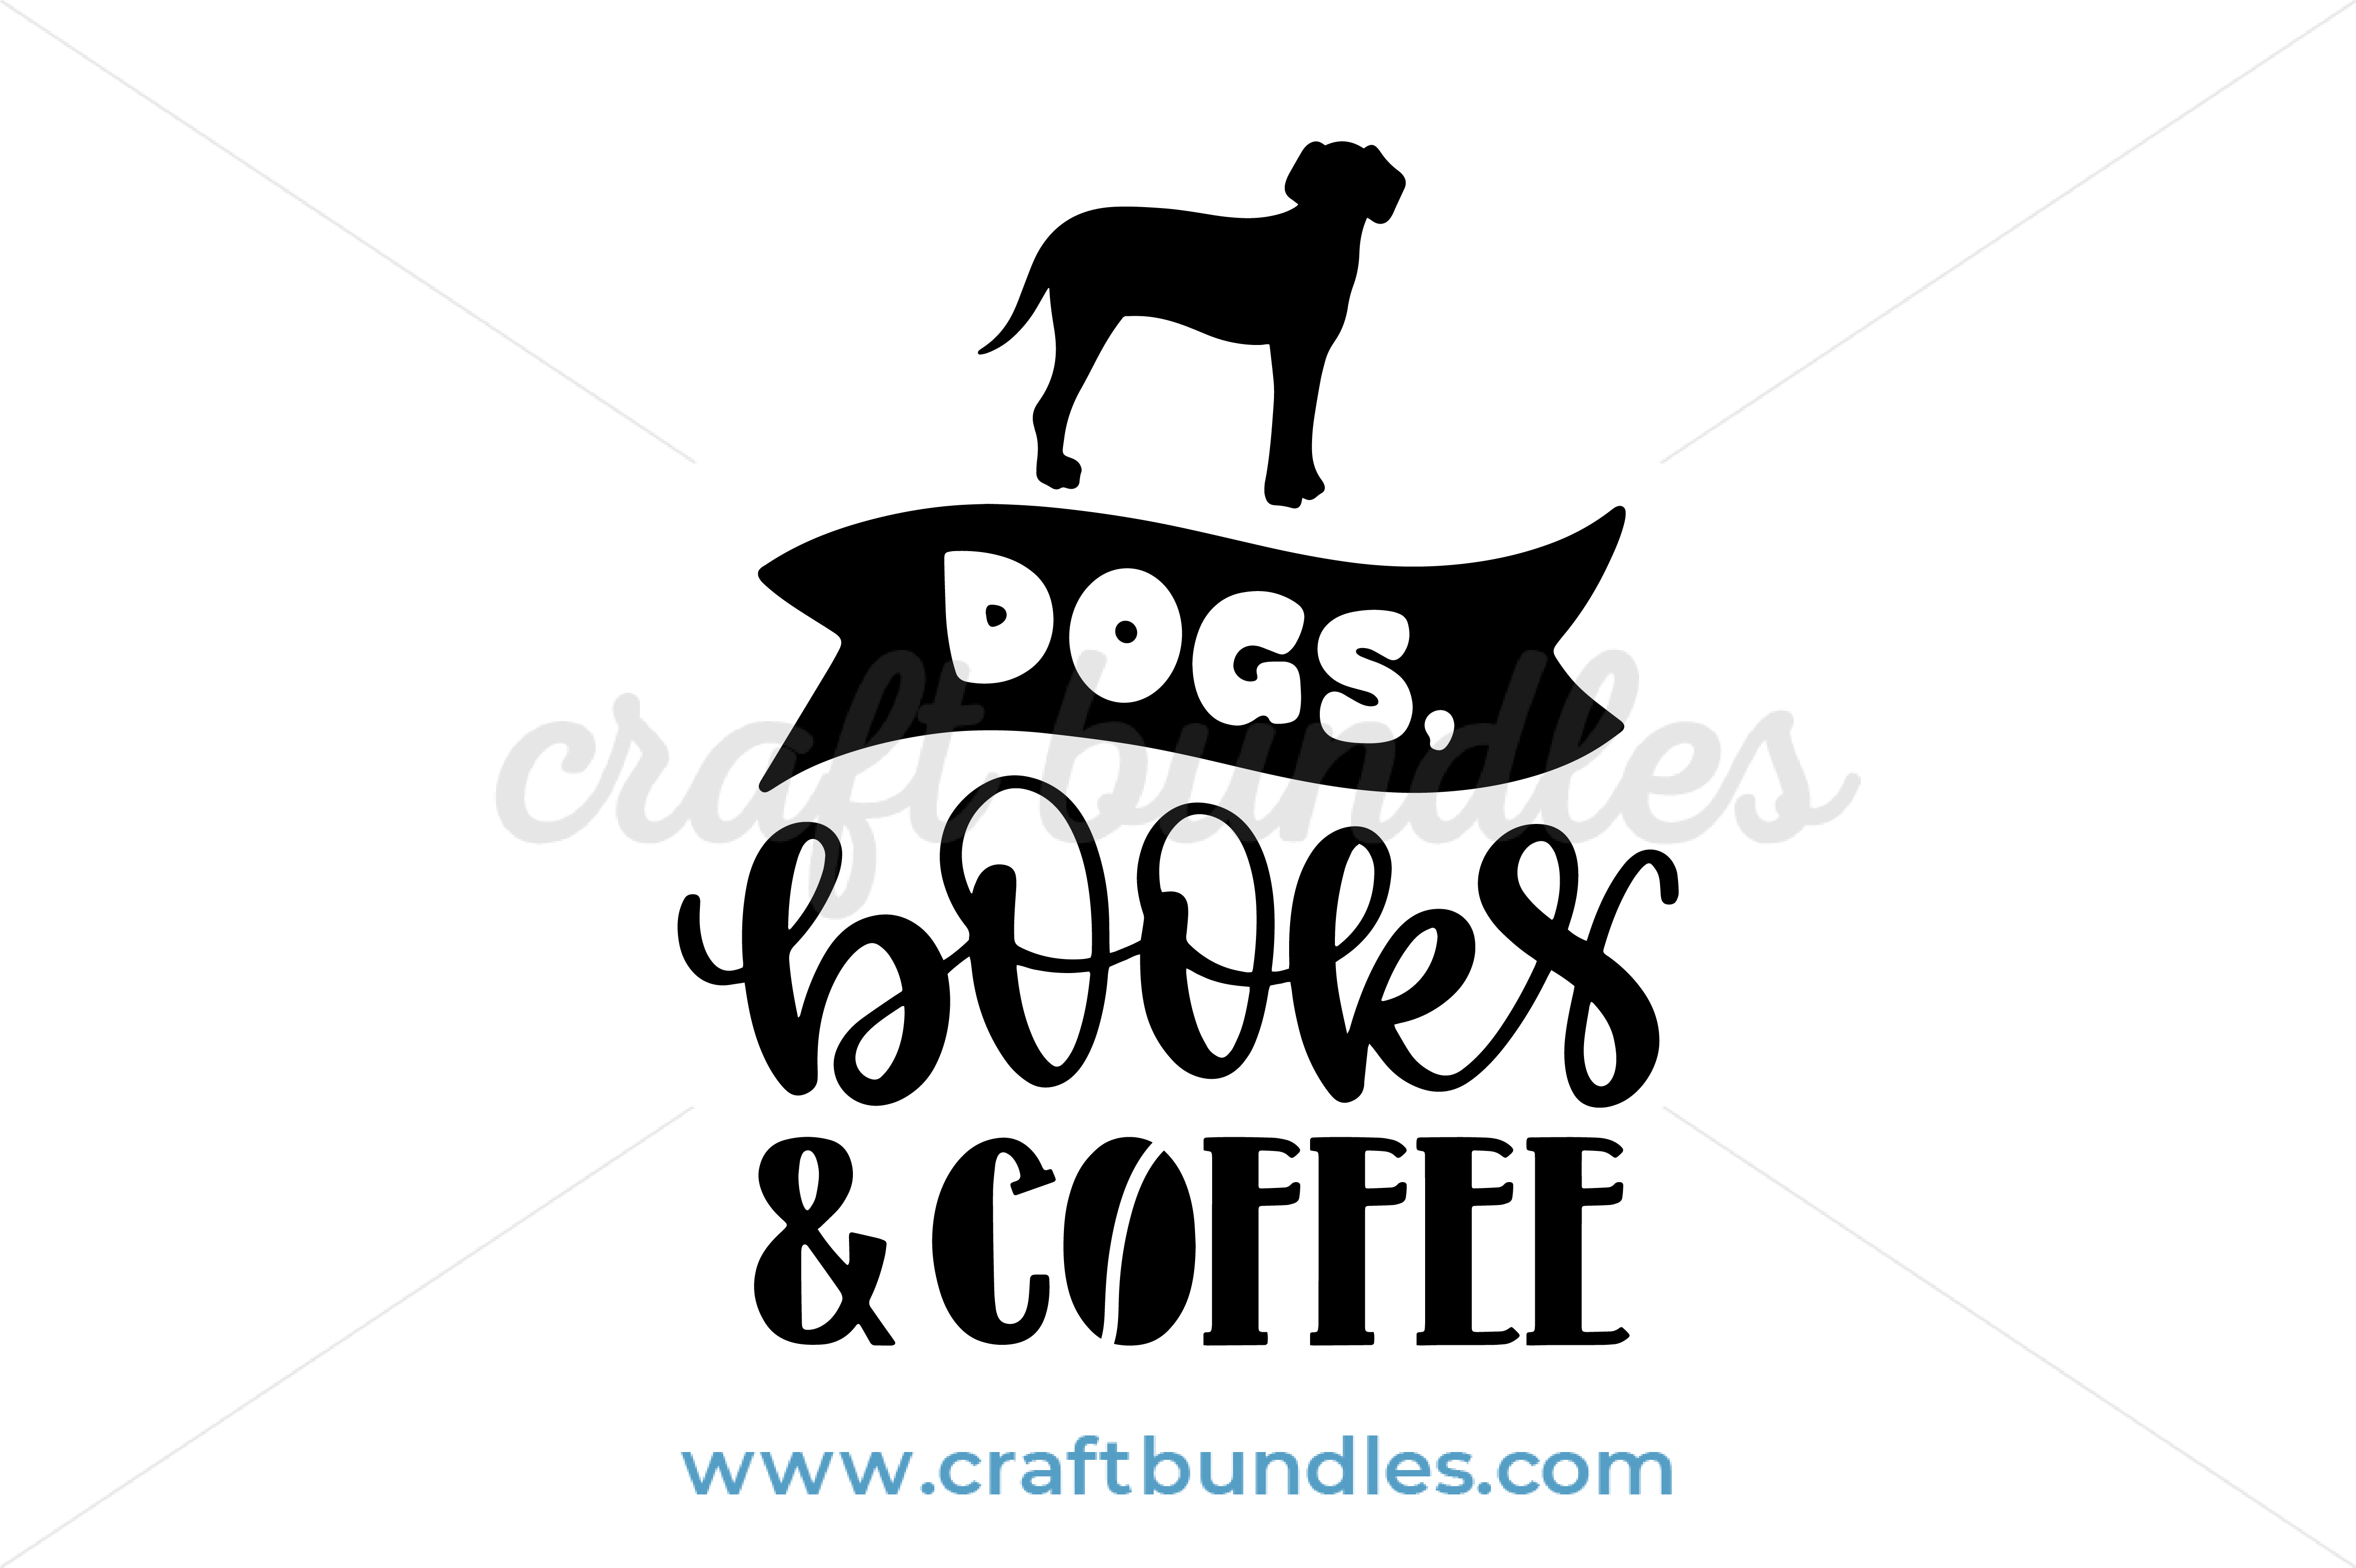 Download Dogs Books And Coffee SVG Cut File - CraftBundles